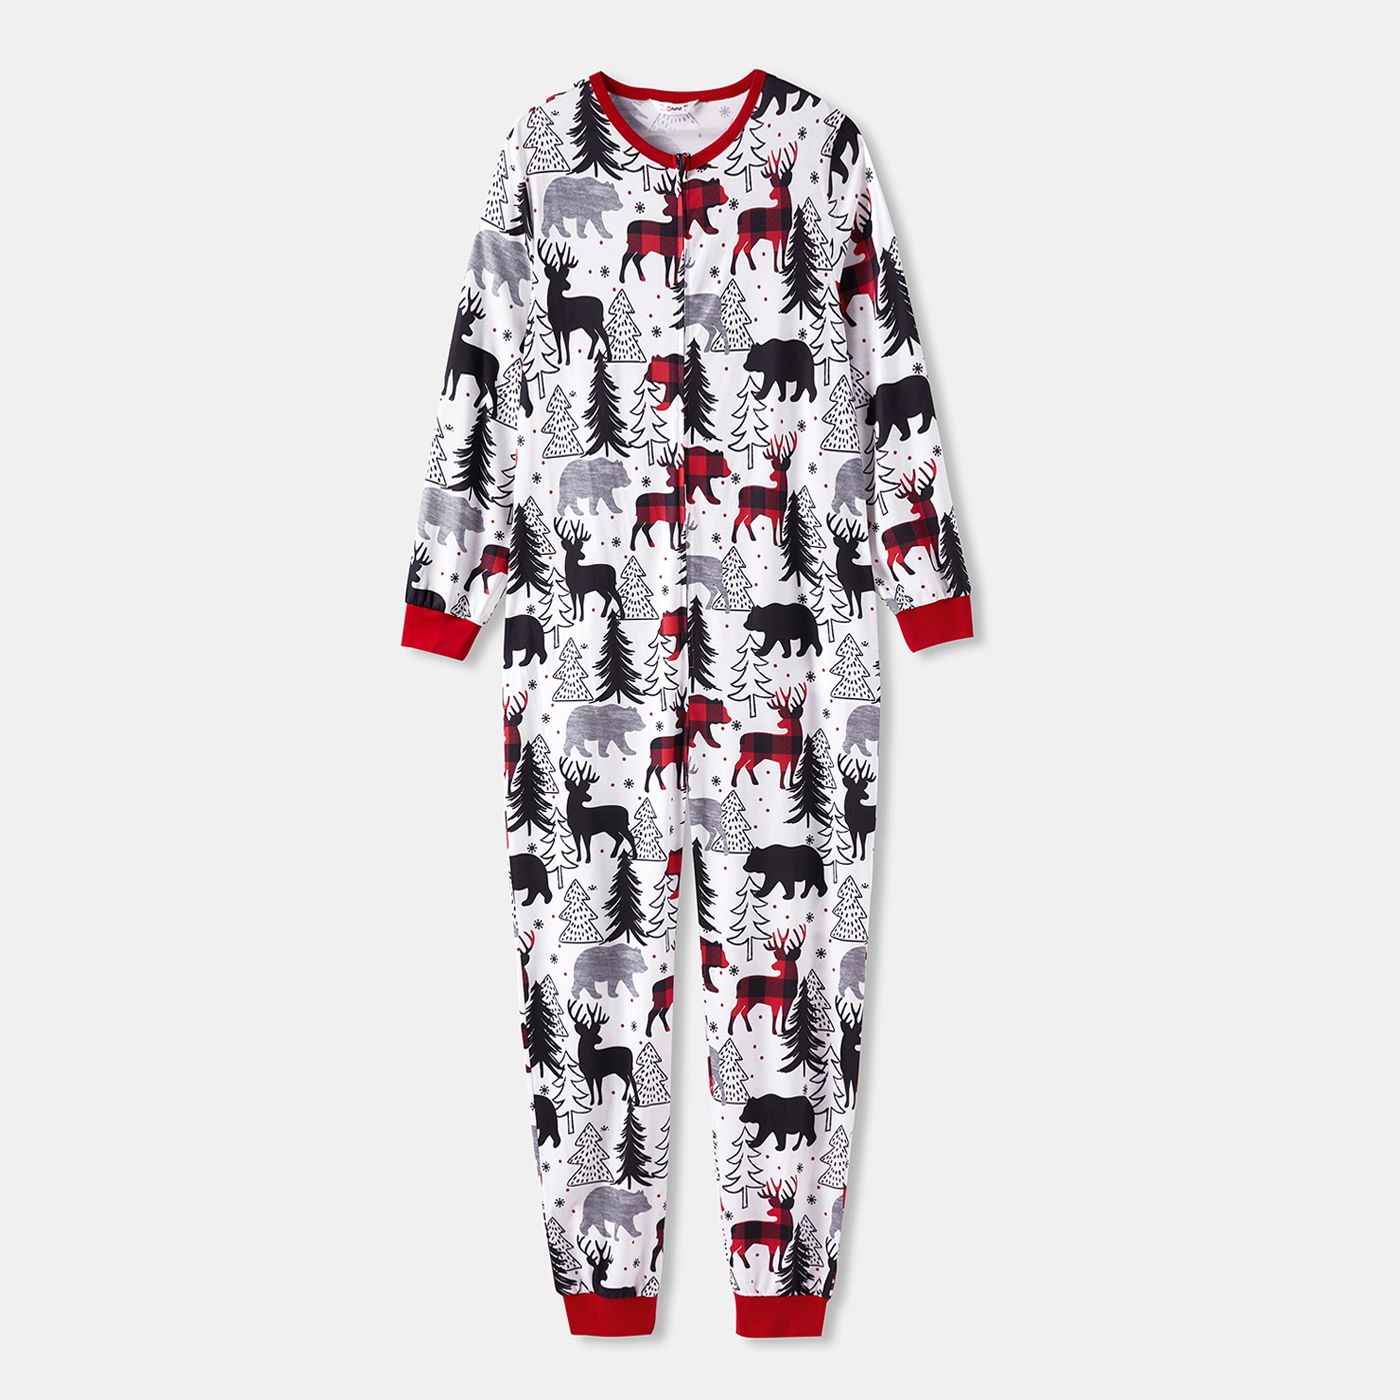 Christmas Family Matching Allover Print Long-sleeve Zipper Onesies Pajamas (Flame Resistant)